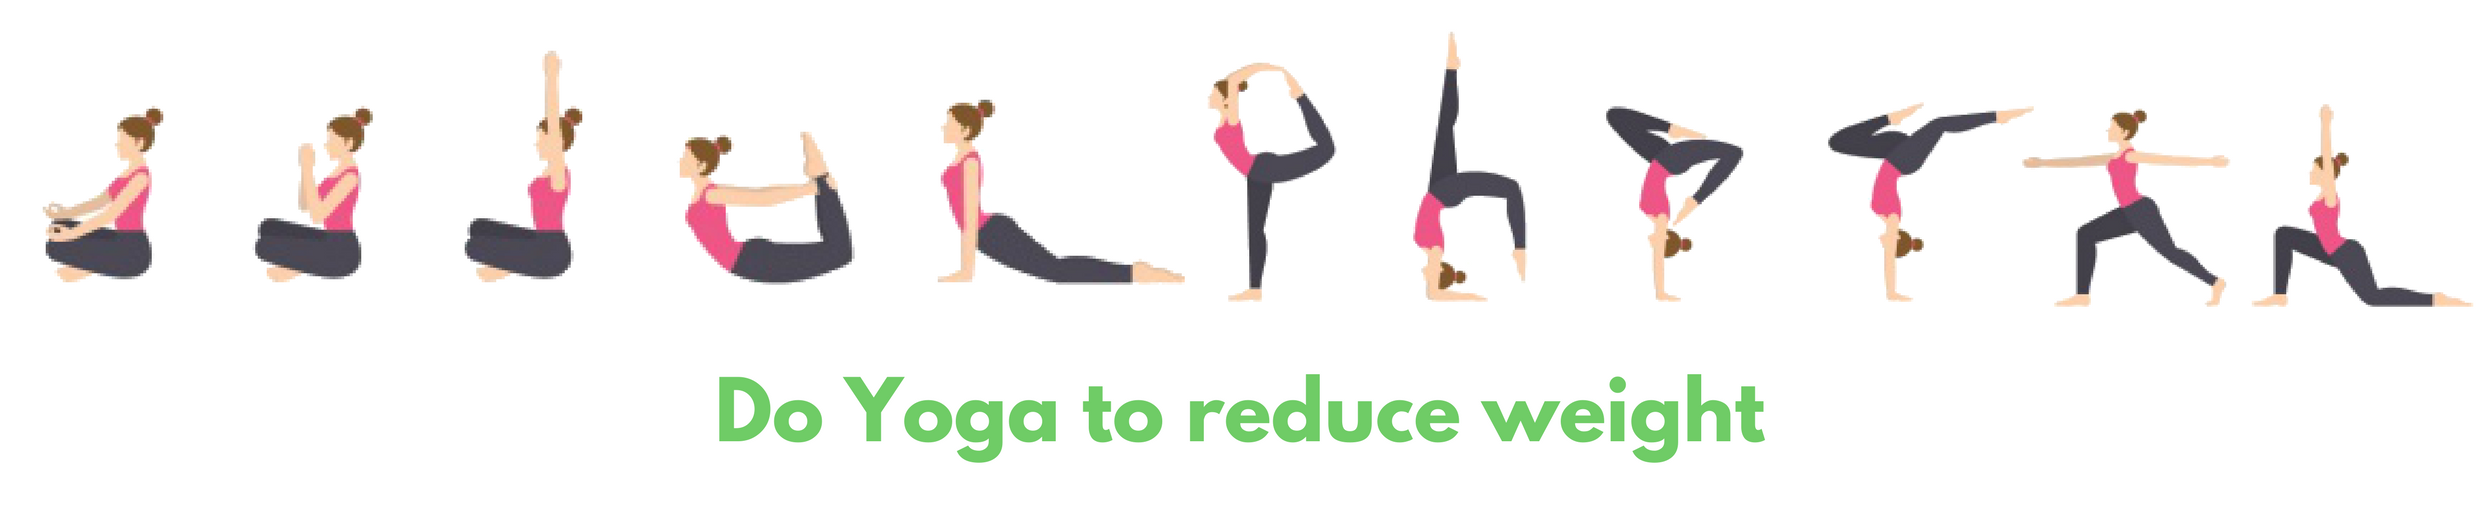 Yoga to reduce weight